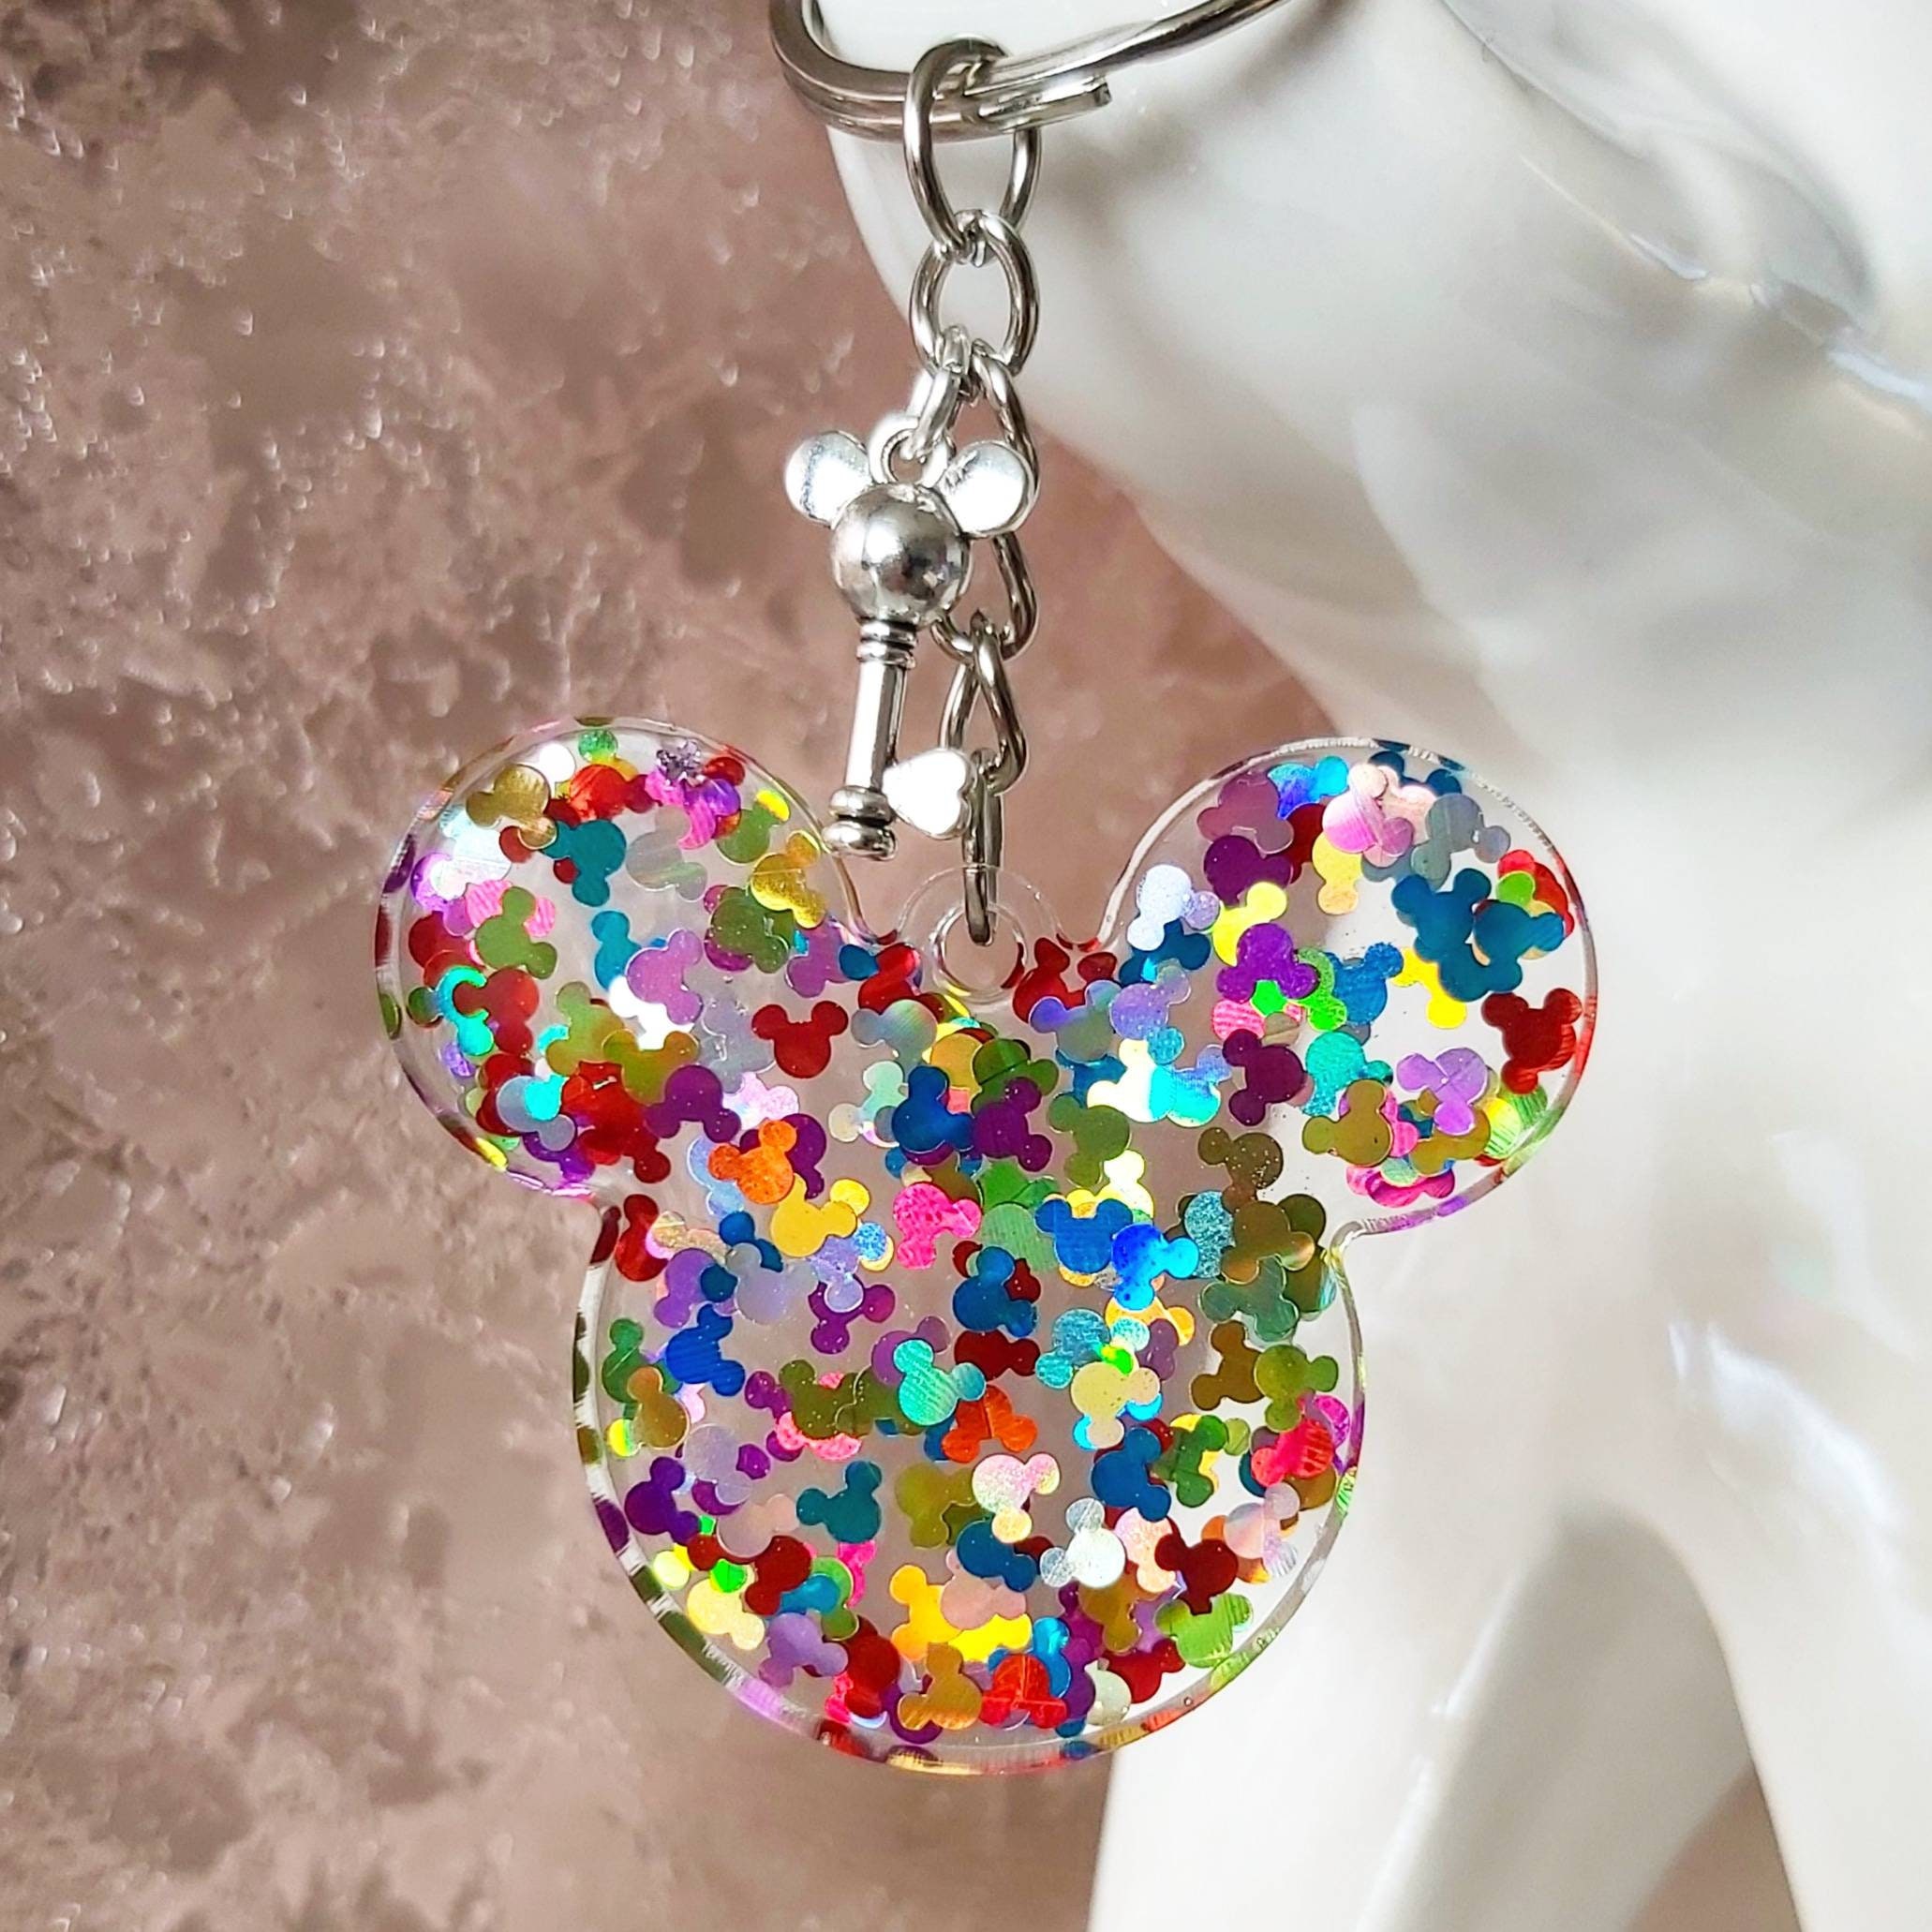 Minnie mouse handmade designer style Keyring Faux Leather bag charm